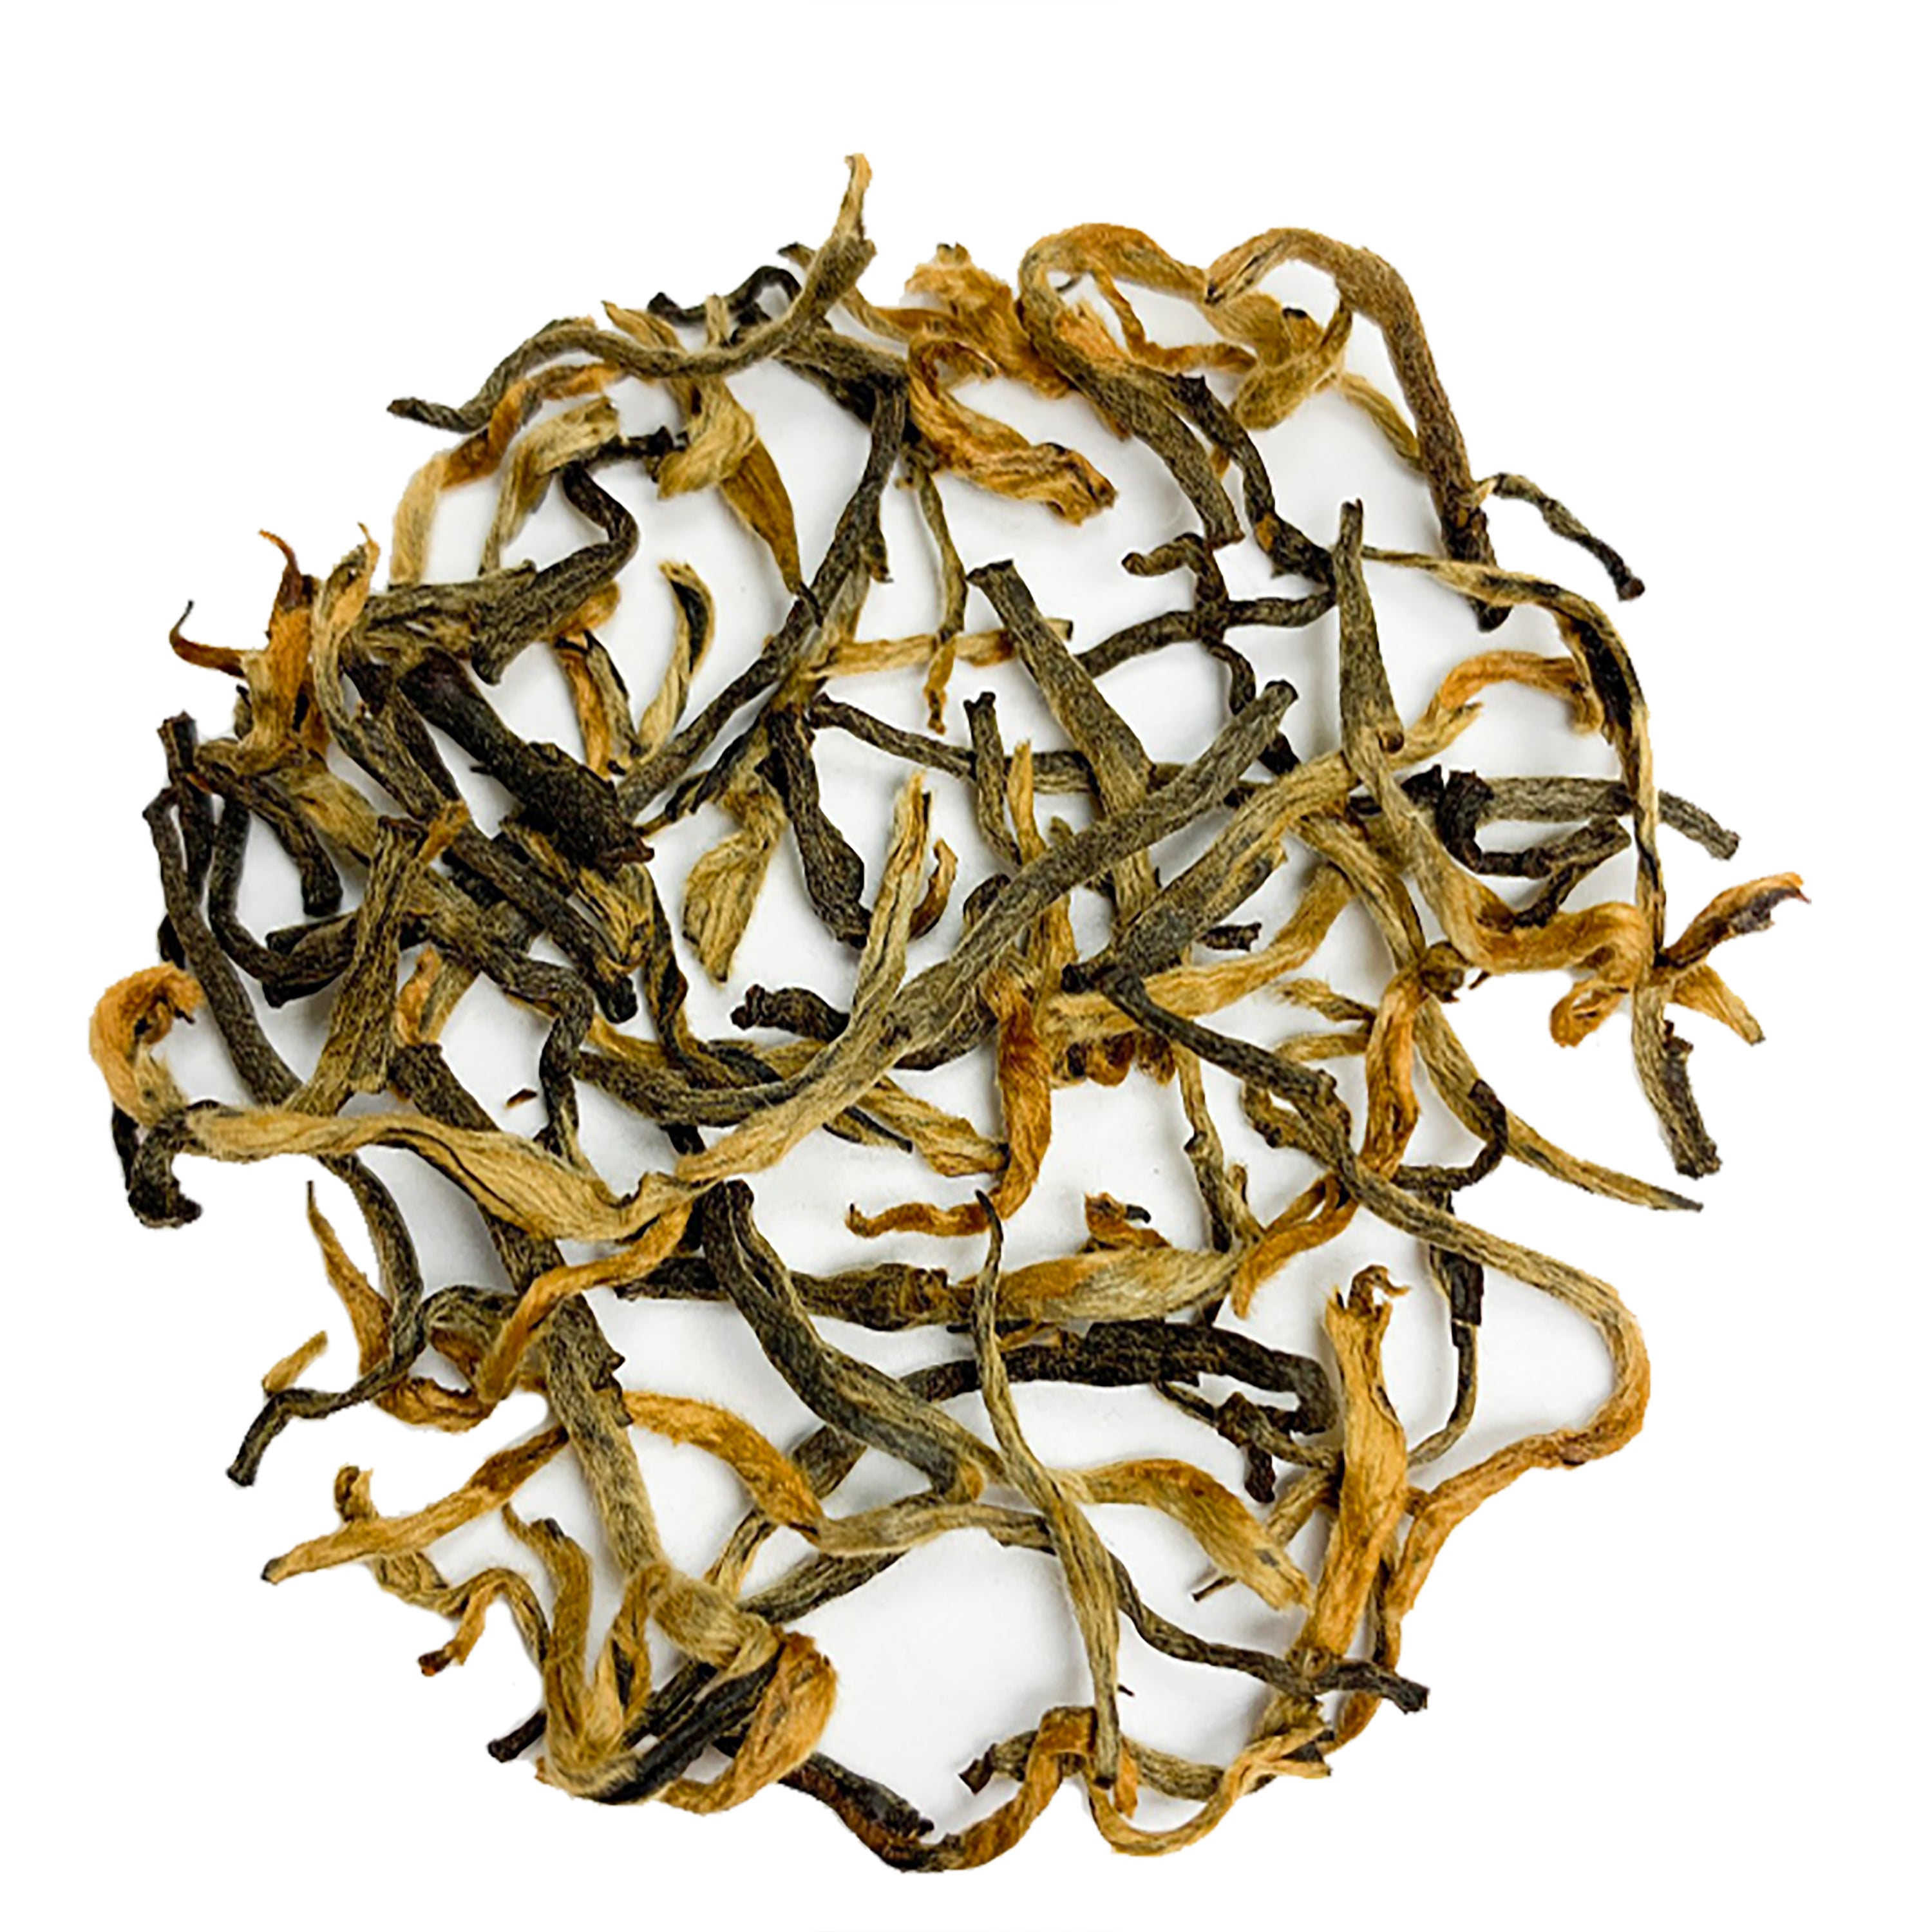 Golden tips first class tea is fine, potent buds appear after a period of dormancy the tea plant goes through in the winter. This causes them to be full of flavors and packed with antioxidants, when processed into Black tea. This Golden Tips Black Tea is the most complex Black tea that is devoid of astringency, with a soft and velvety texture.